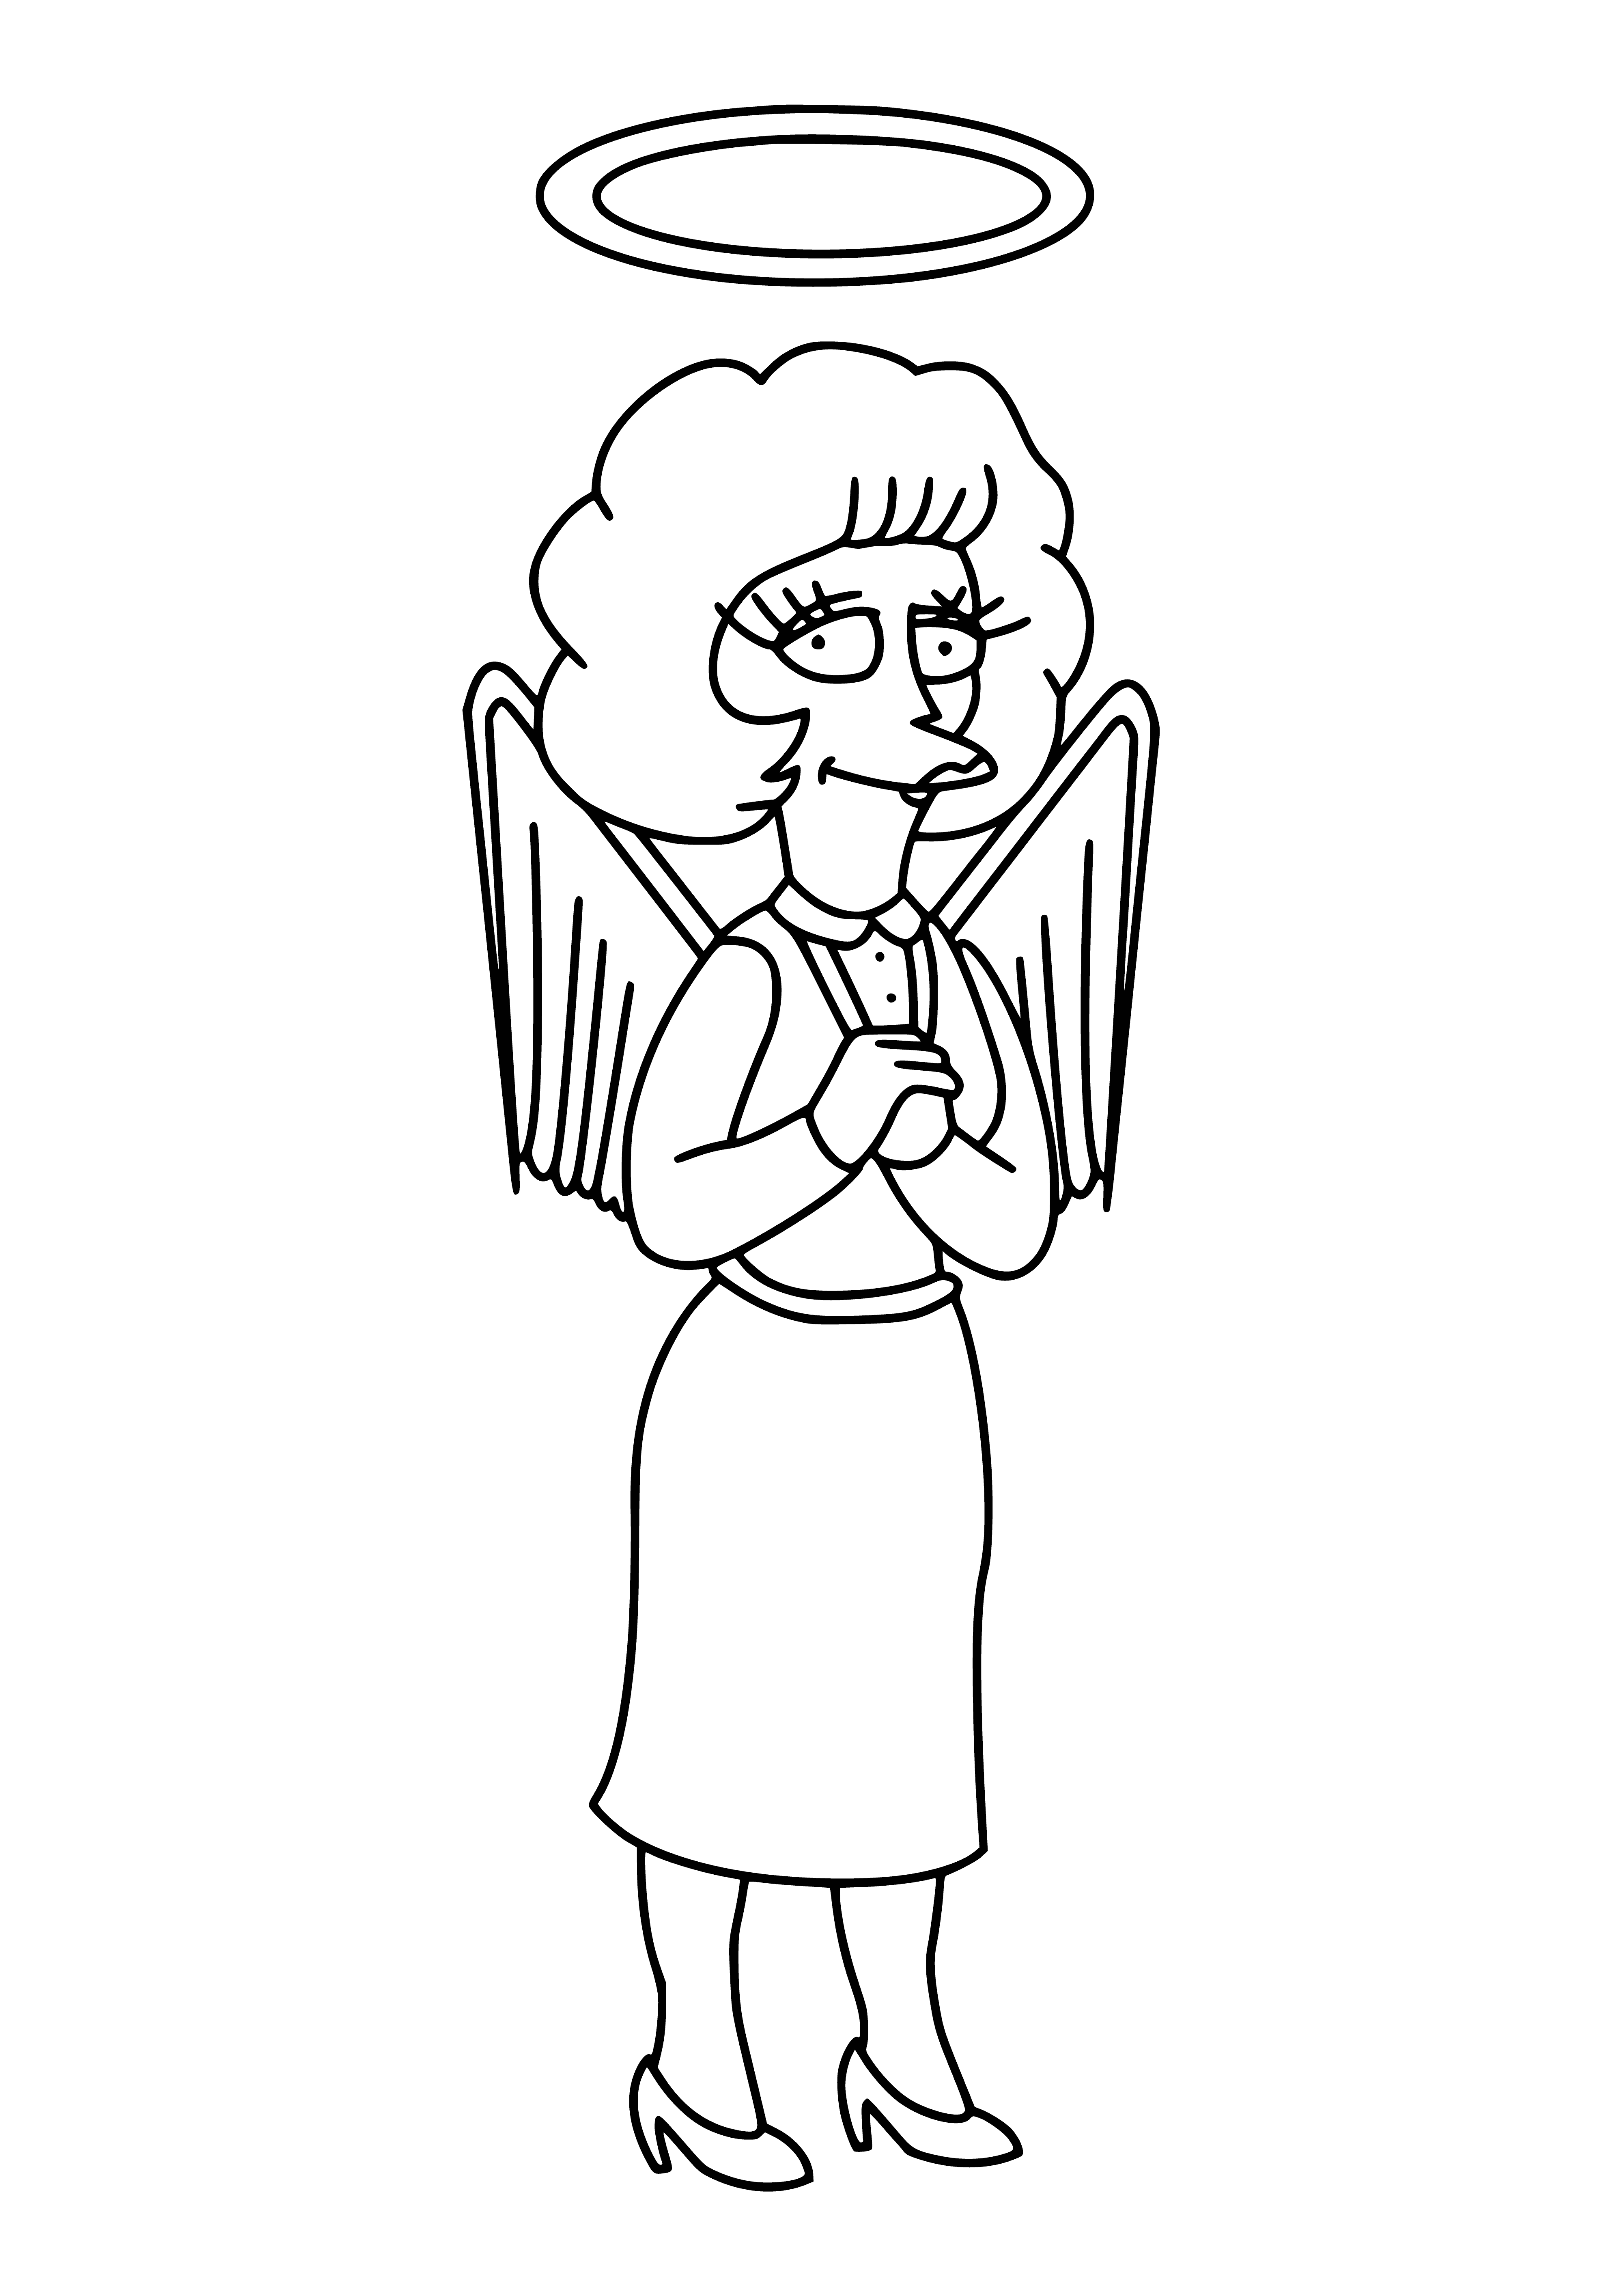 Mod Flanders coloring page